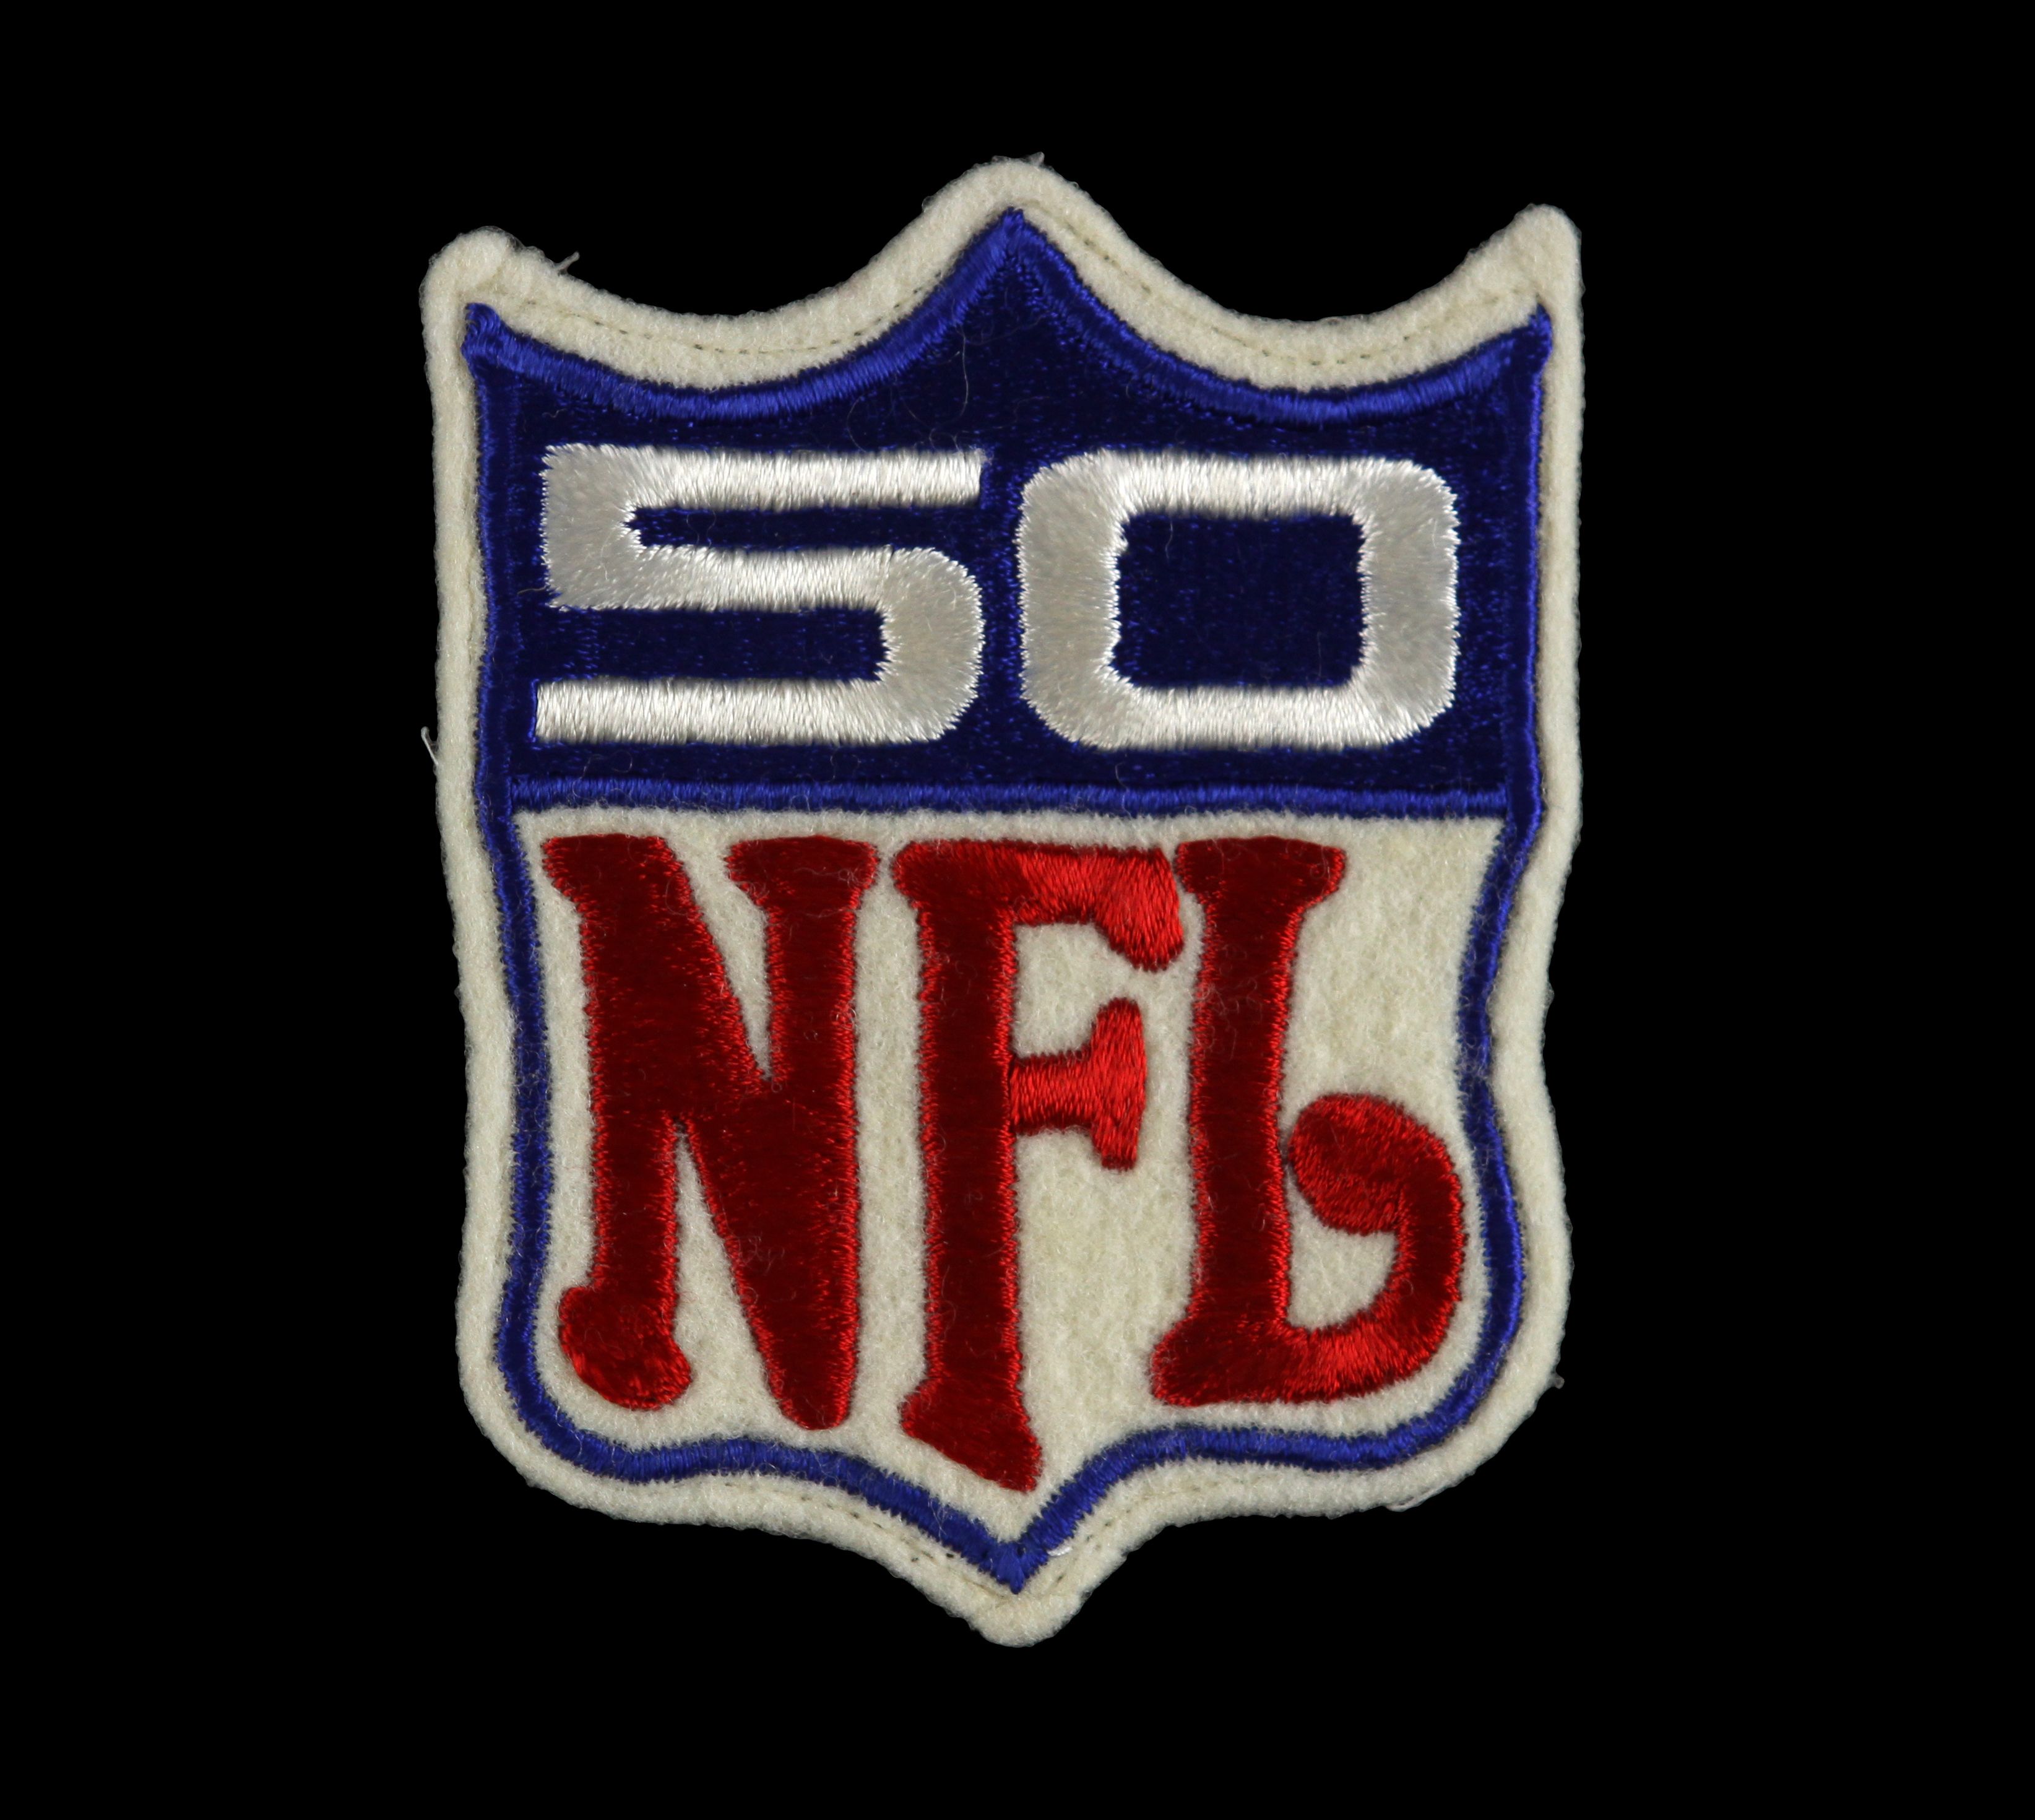 NFL 50th Anniversary patch